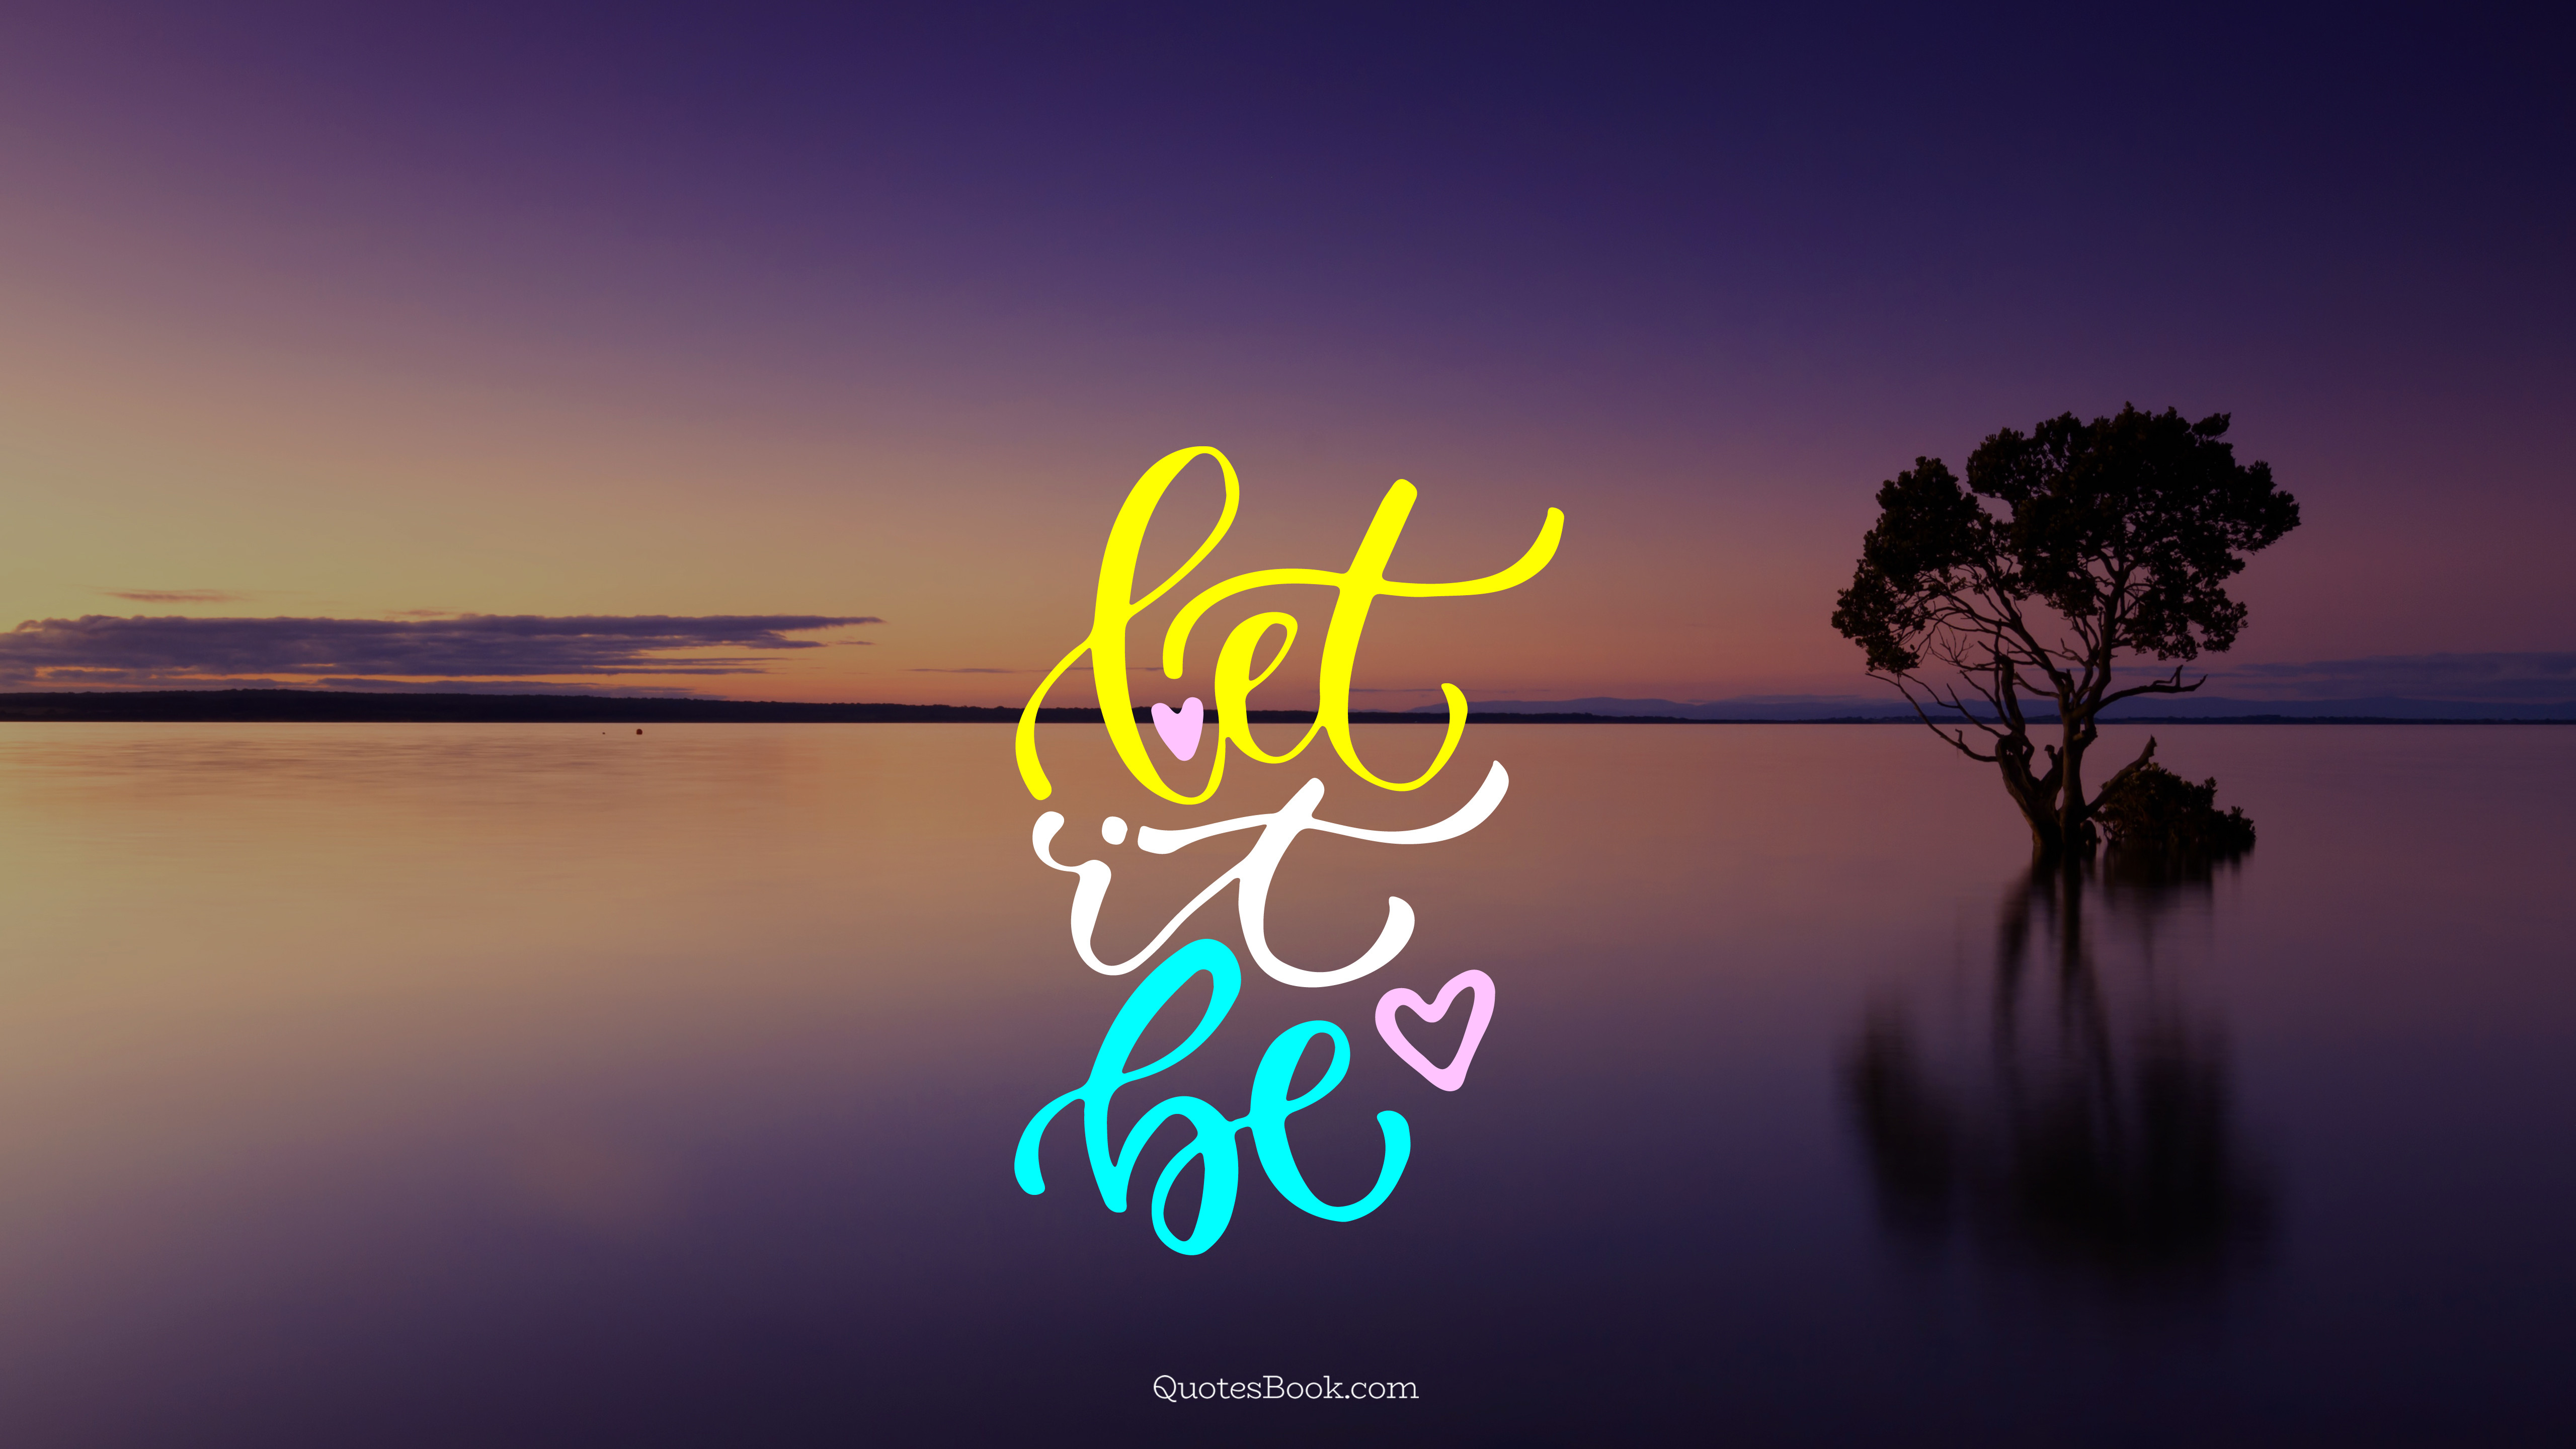 Let it be - QuotesBook